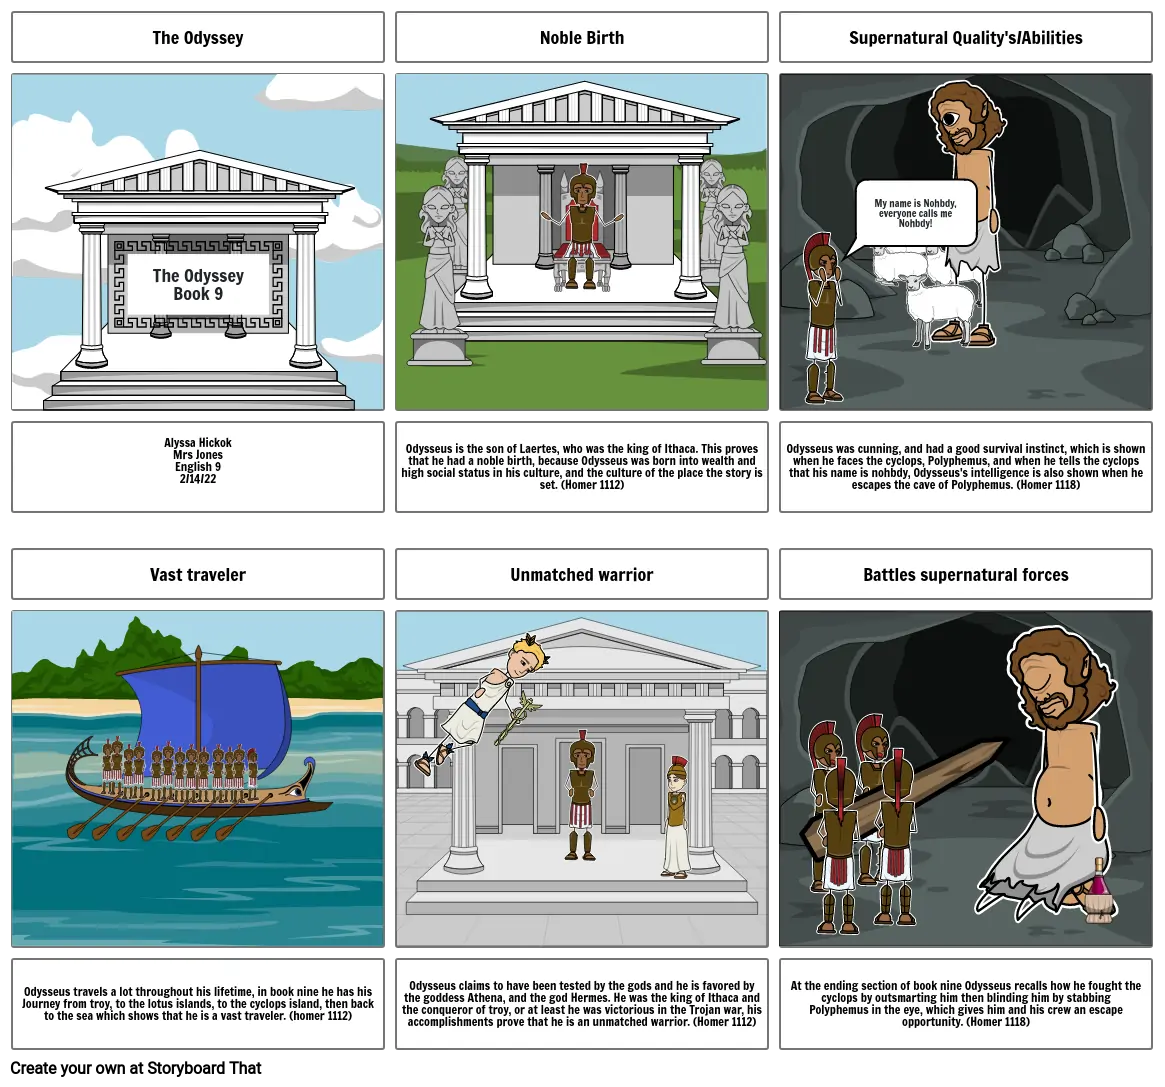 Epic Hero Story boarding activity the Odyssey book 9